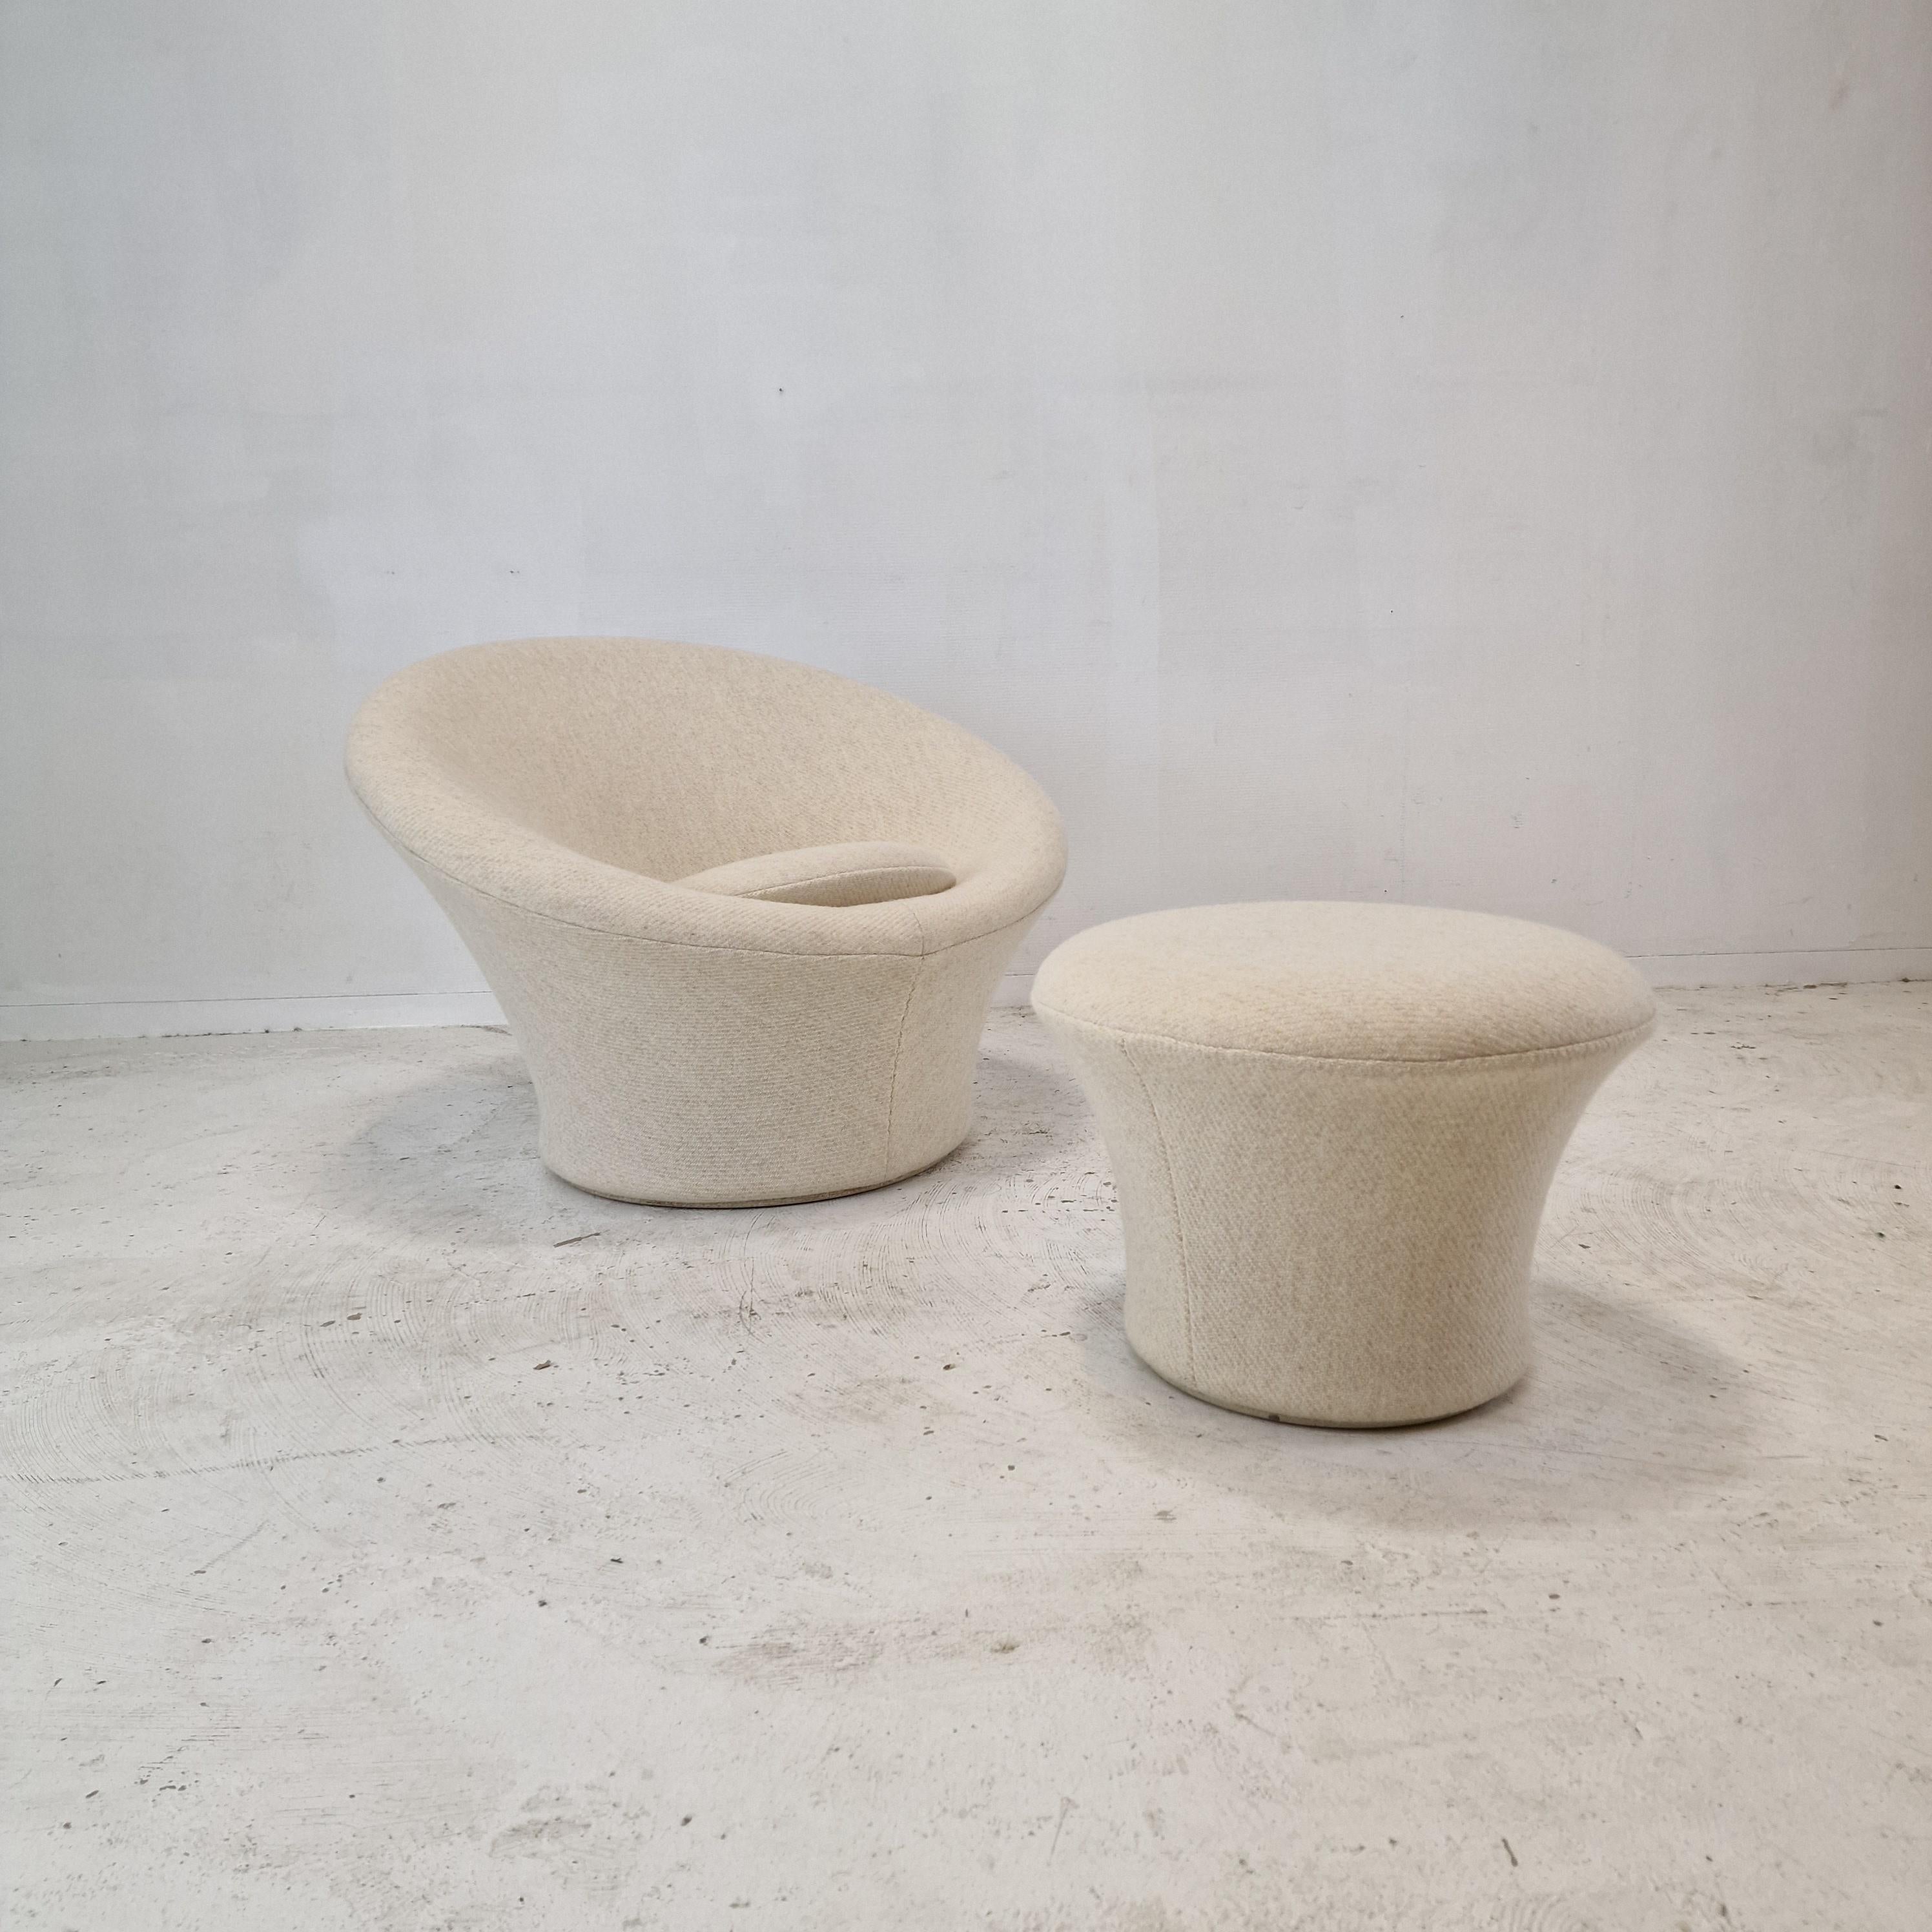 Stunning Mushroom set, designed by Pierre Paulin and fabricated by Artifort in the 60’s. 

The chair and the pouf are completely restored with new fabric and new foam by a French Pierre Paulin specialist, they are in perfect condition.

This very